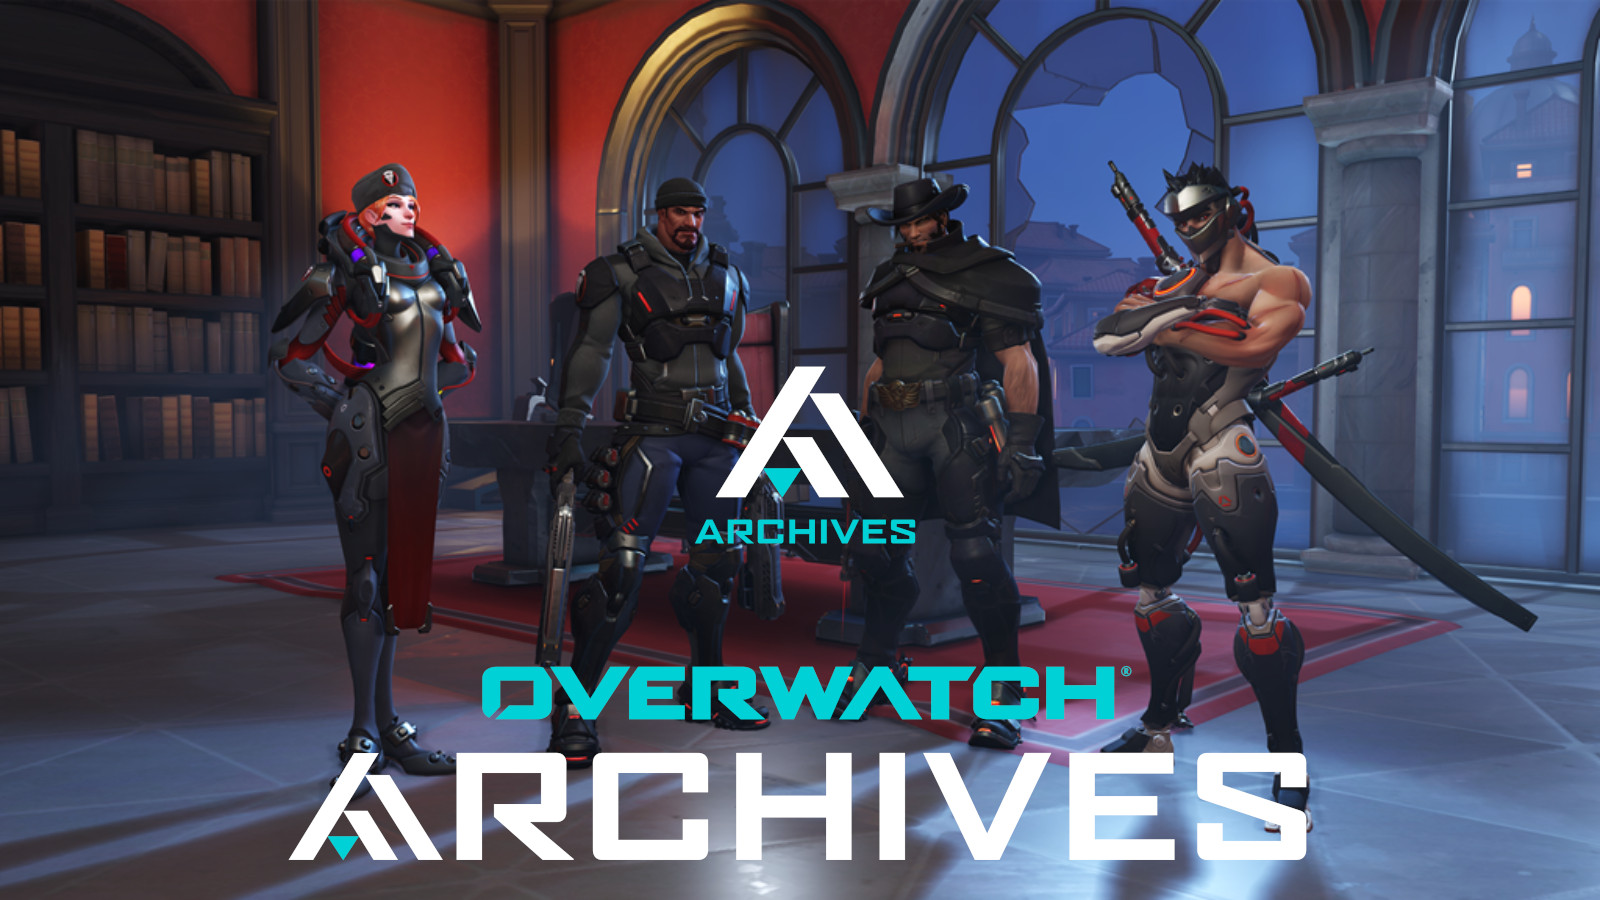 Does the Overwatch Archives 2021 Event live up to its expectations